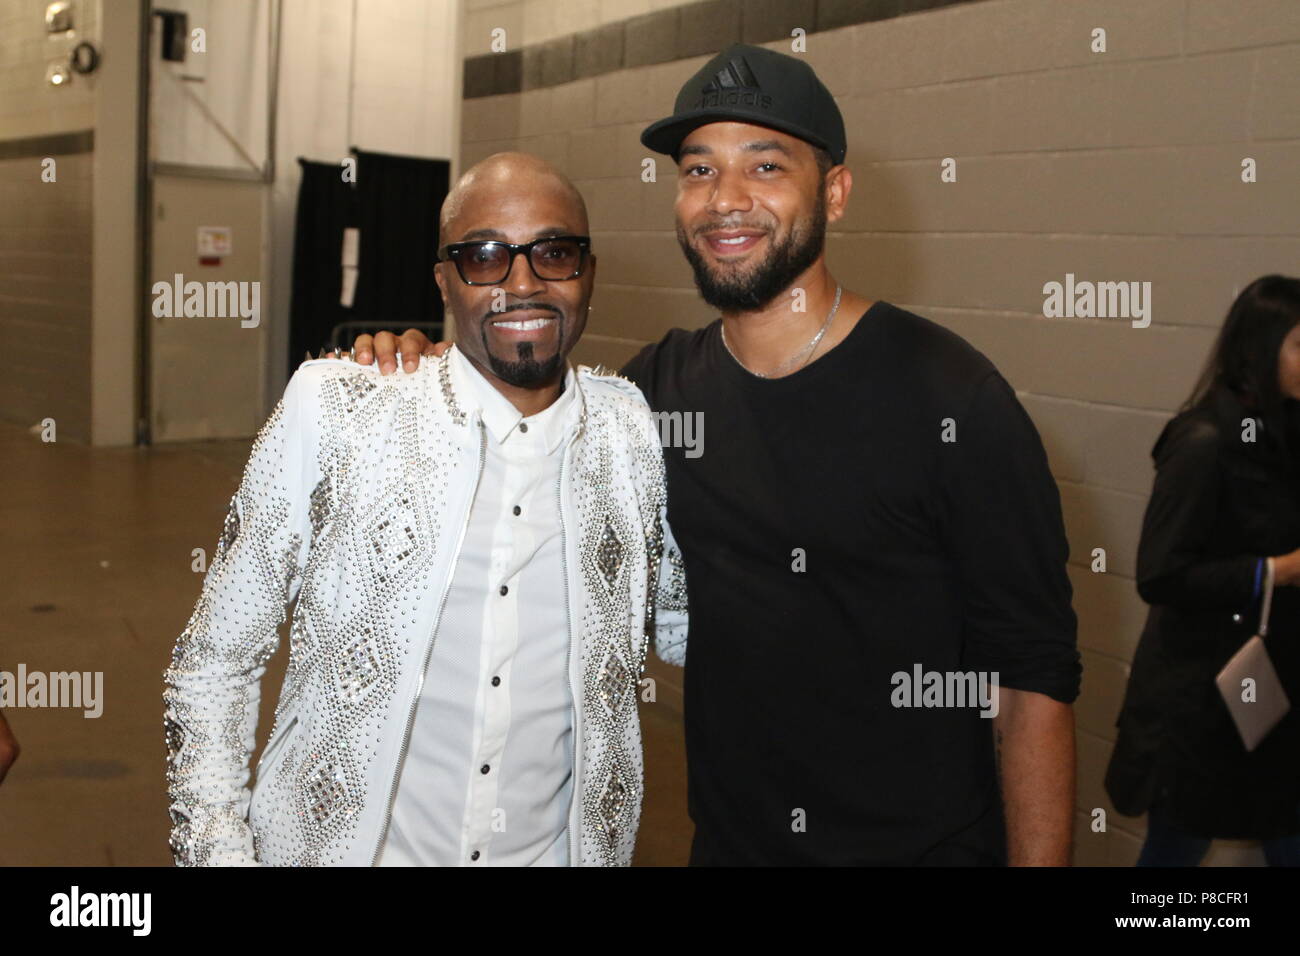 New Orleans, LA, USA. 8th July, 2018. Teddy Riley & Jussie Smollett attend the Essence Festival at The Mercedes Benz Superdome, July 8, 2018 in New Orleans, LA. Credit: Walik Goshorn/Mediapunch/Alamy Live News Stock Photo